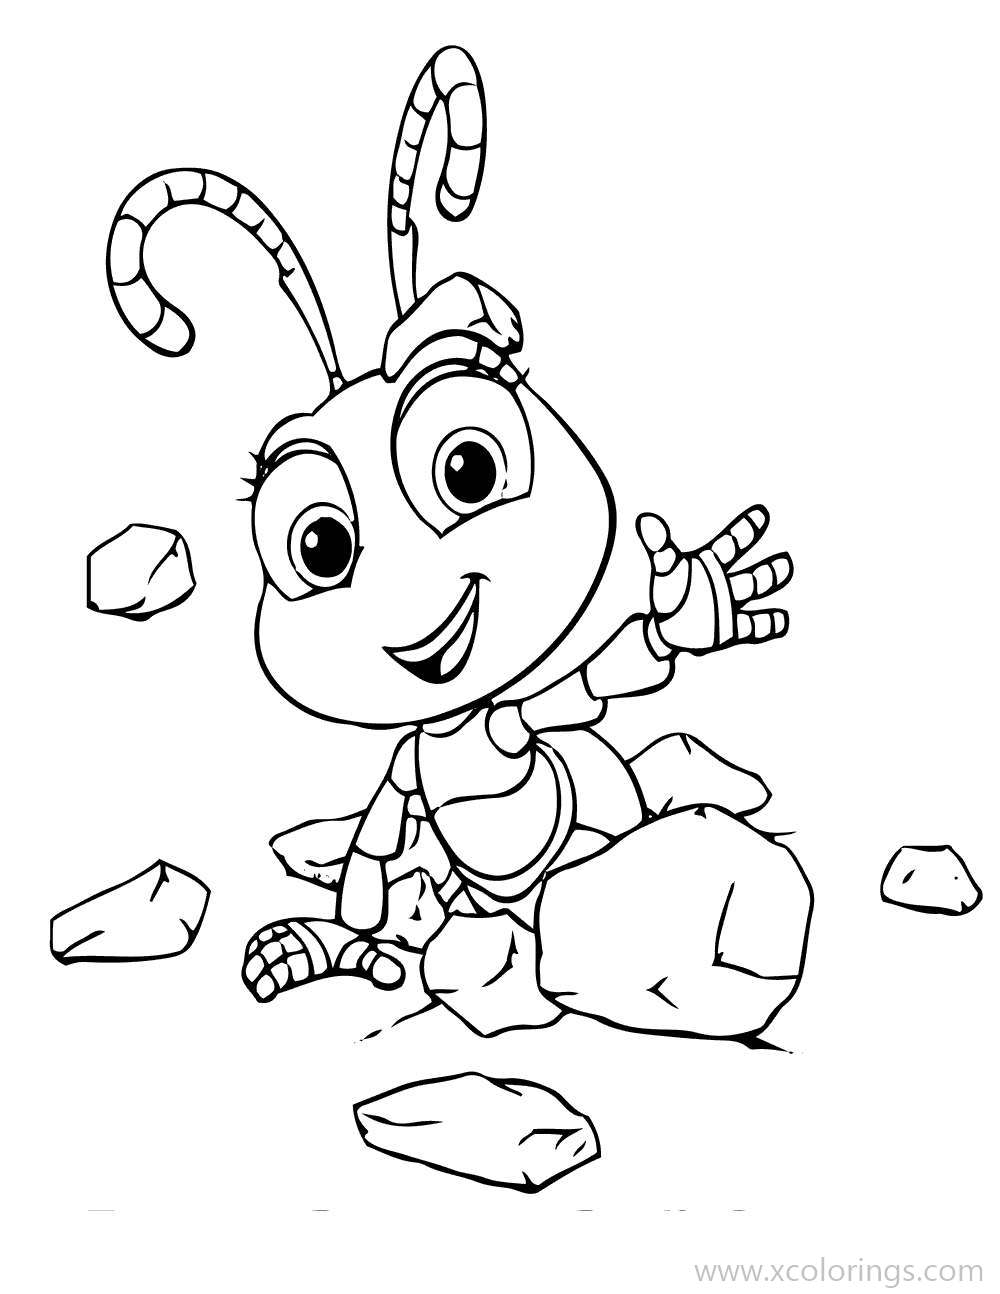 Free A Bugs Life Coloring Pages Dot Playing with Rocks printable